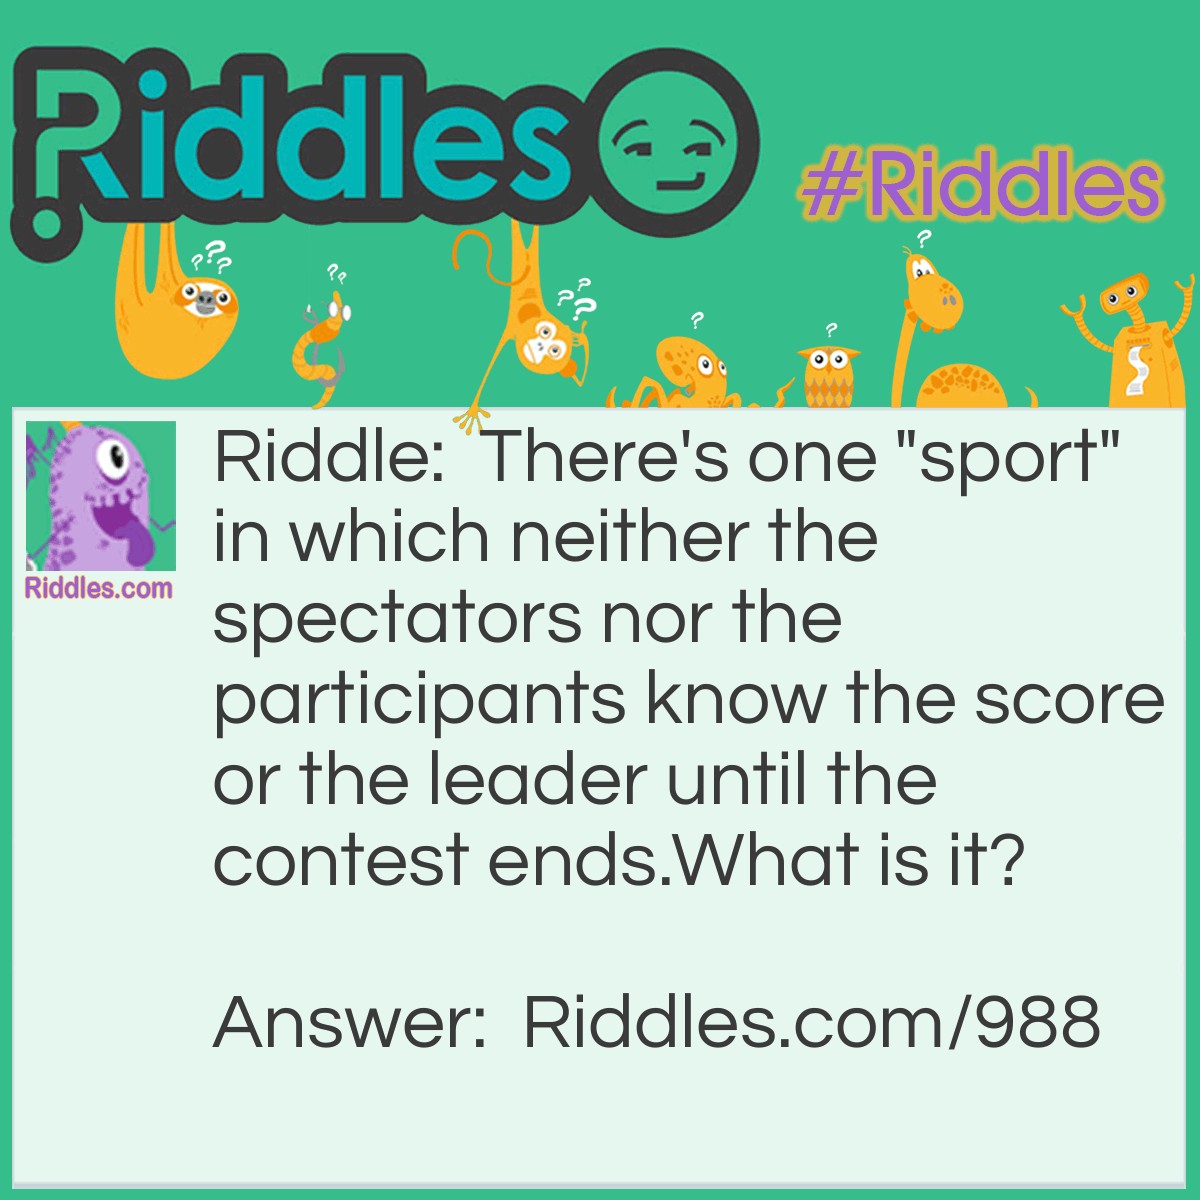 Riddle: There's one "sport" in which neither the spectators nor the participants know the score or the leader until the contest ends.
What is it? Answer: Boxing.